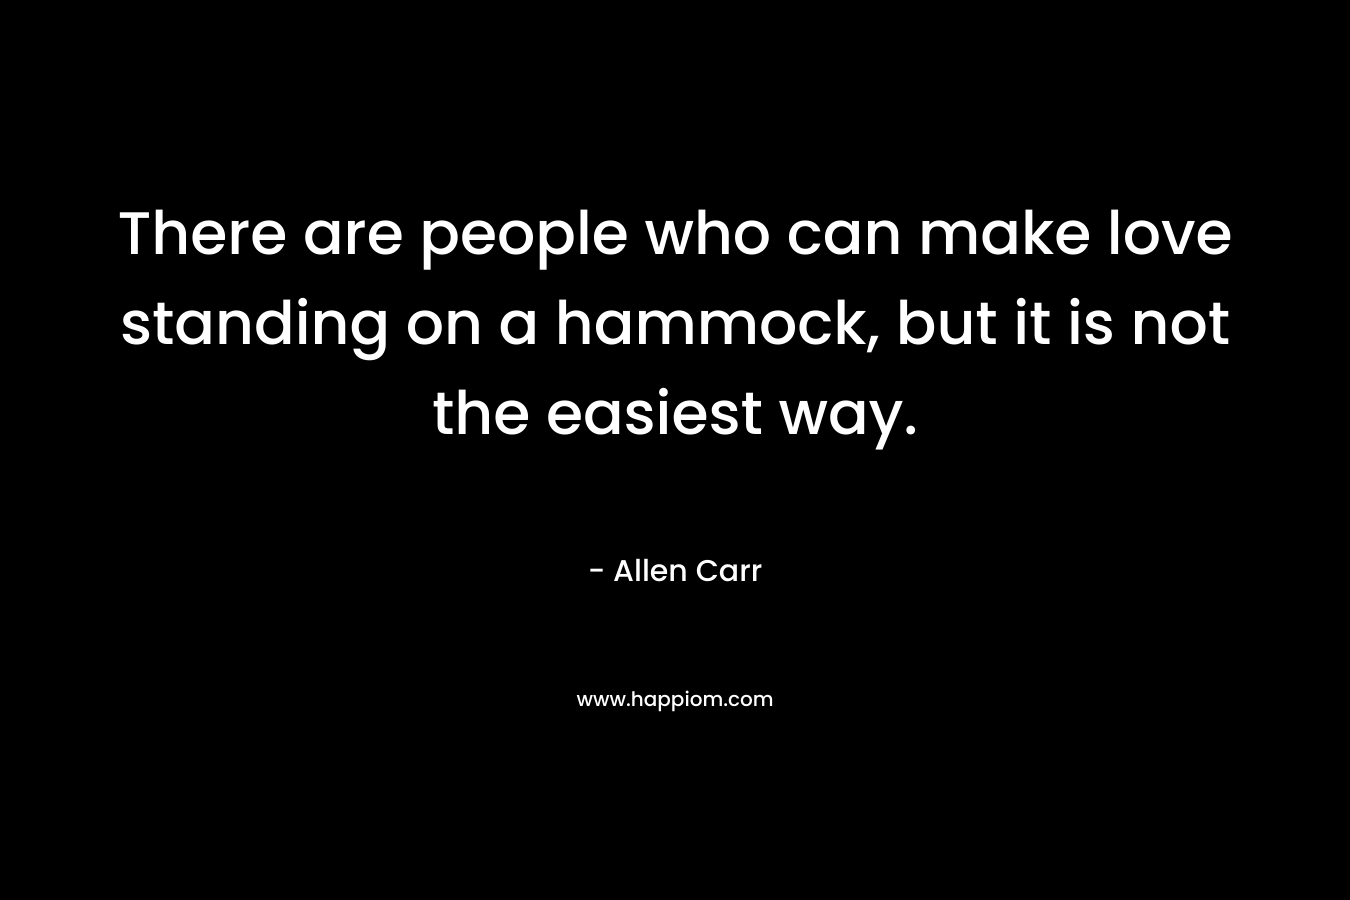 There are people who can make love standing on a hammock, but it is not the easiest way. – Allen Carr